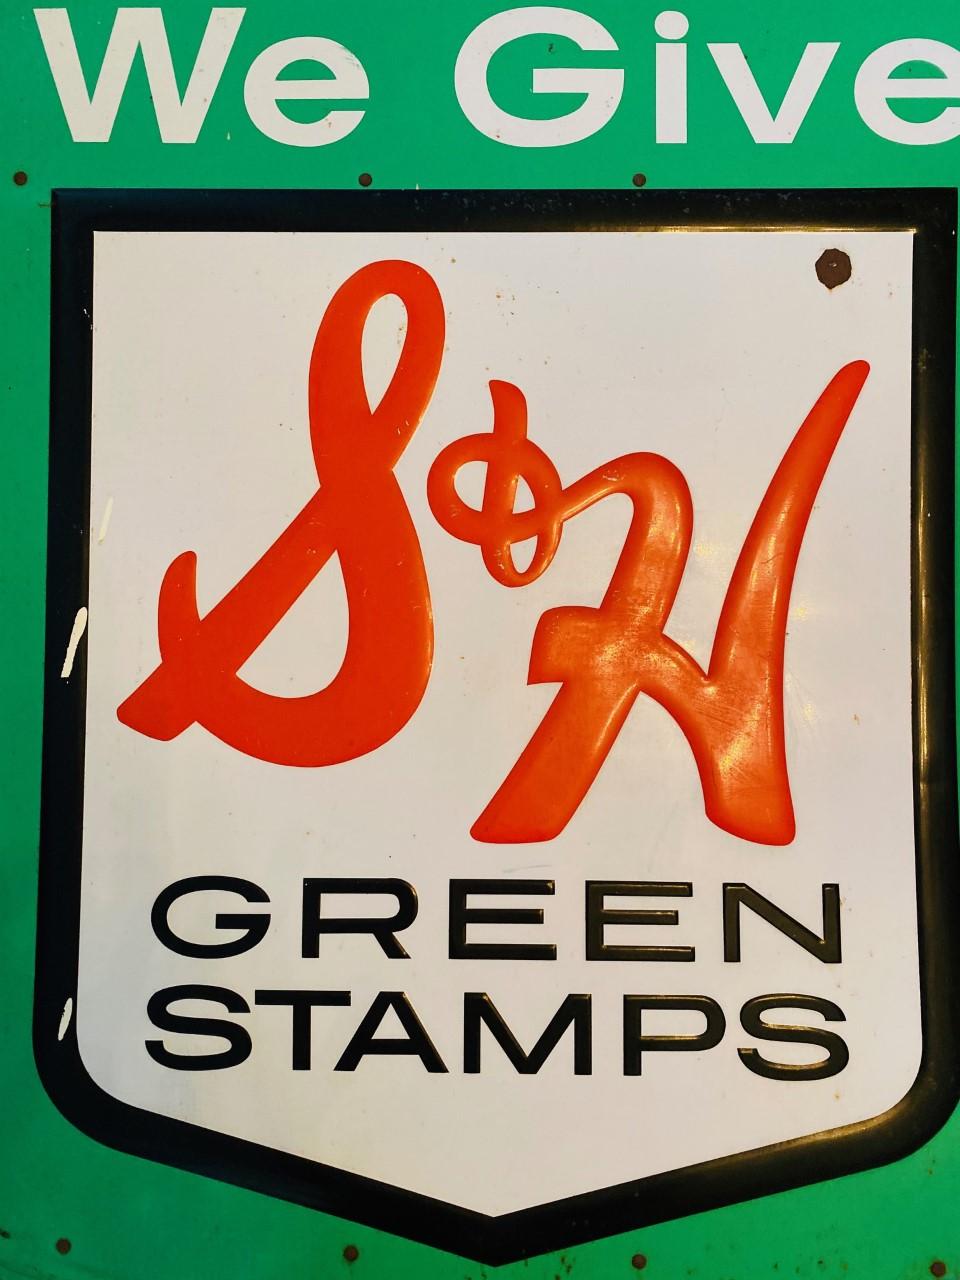 S&H Green Stamps Vintage Metal Tin Sign 12 X 18 Inches 